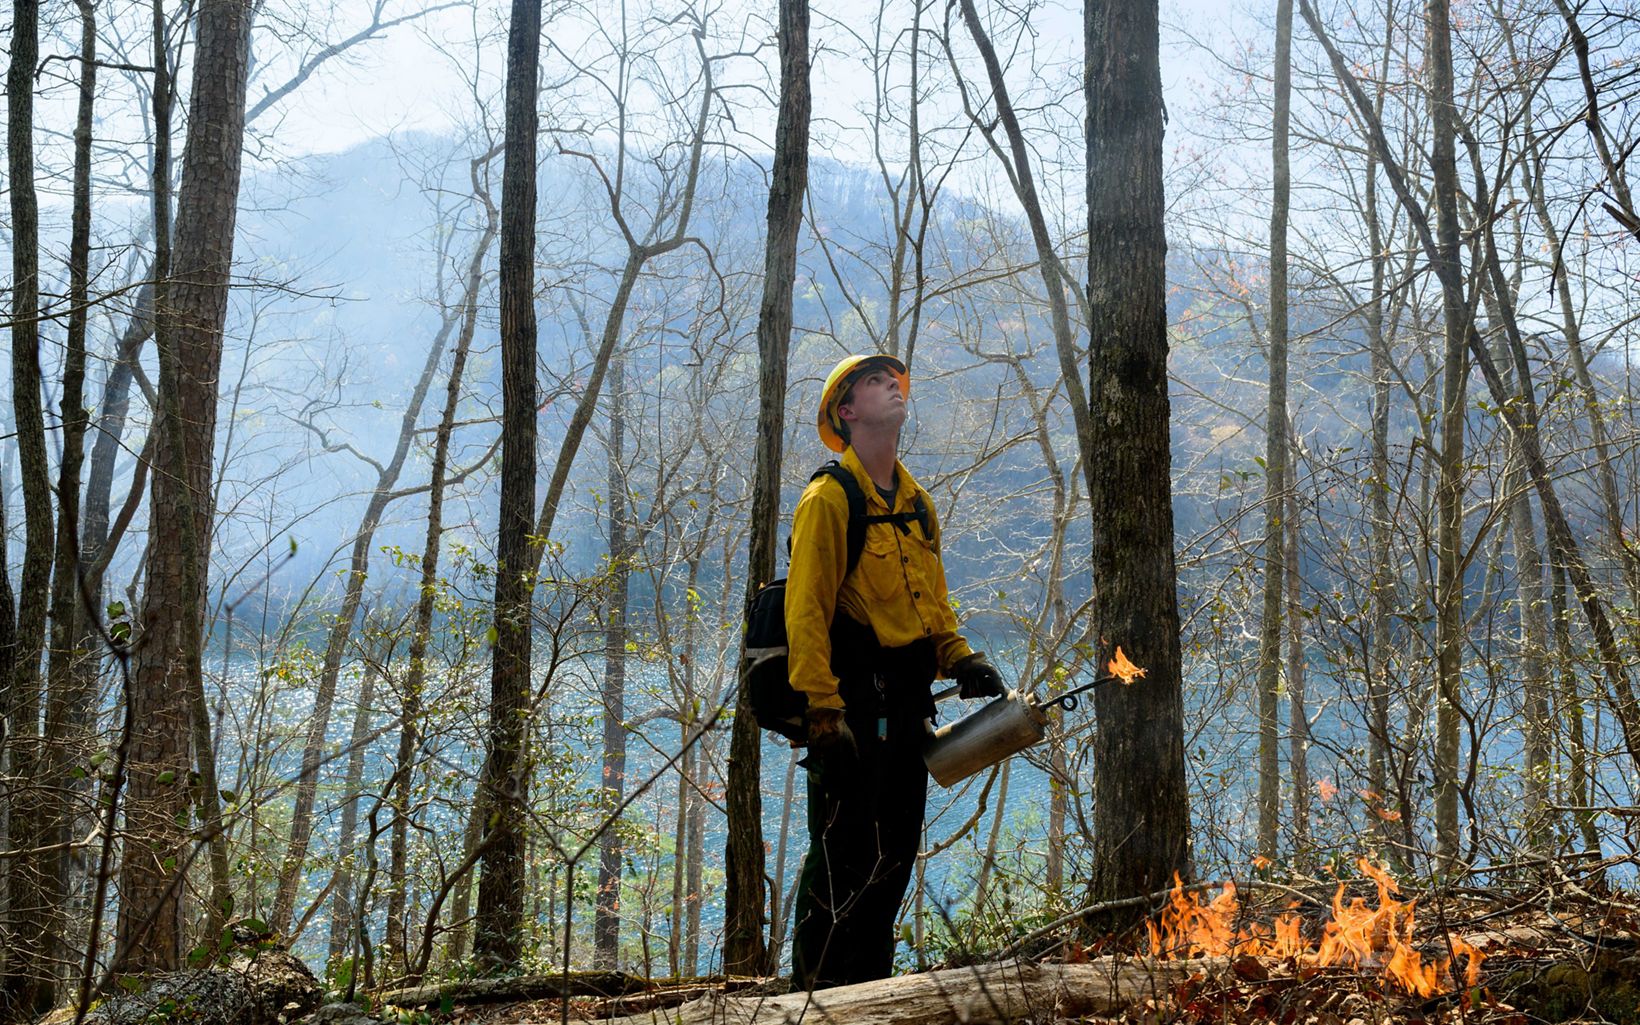 Austin Williams works on conservation activities from controlled burns to brook trout restoration in the Greenville watersheds. © Andrew Kornylak